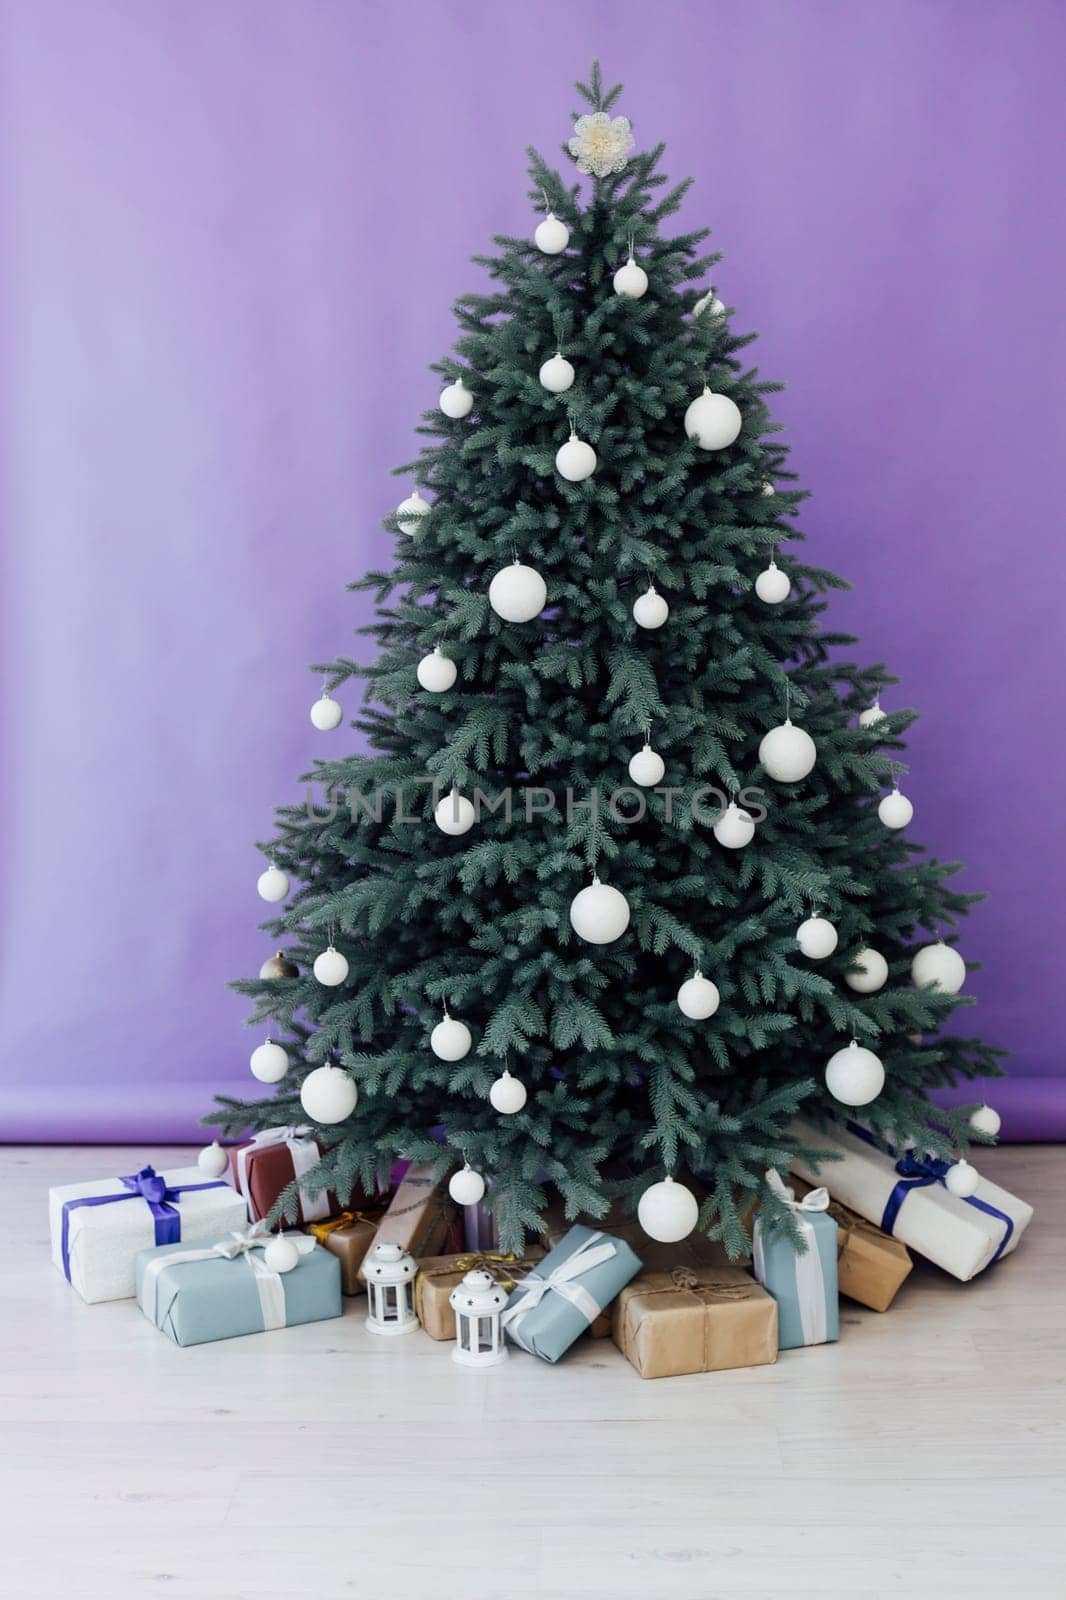 New Year's Christmas Tree with gifts and decor garlands